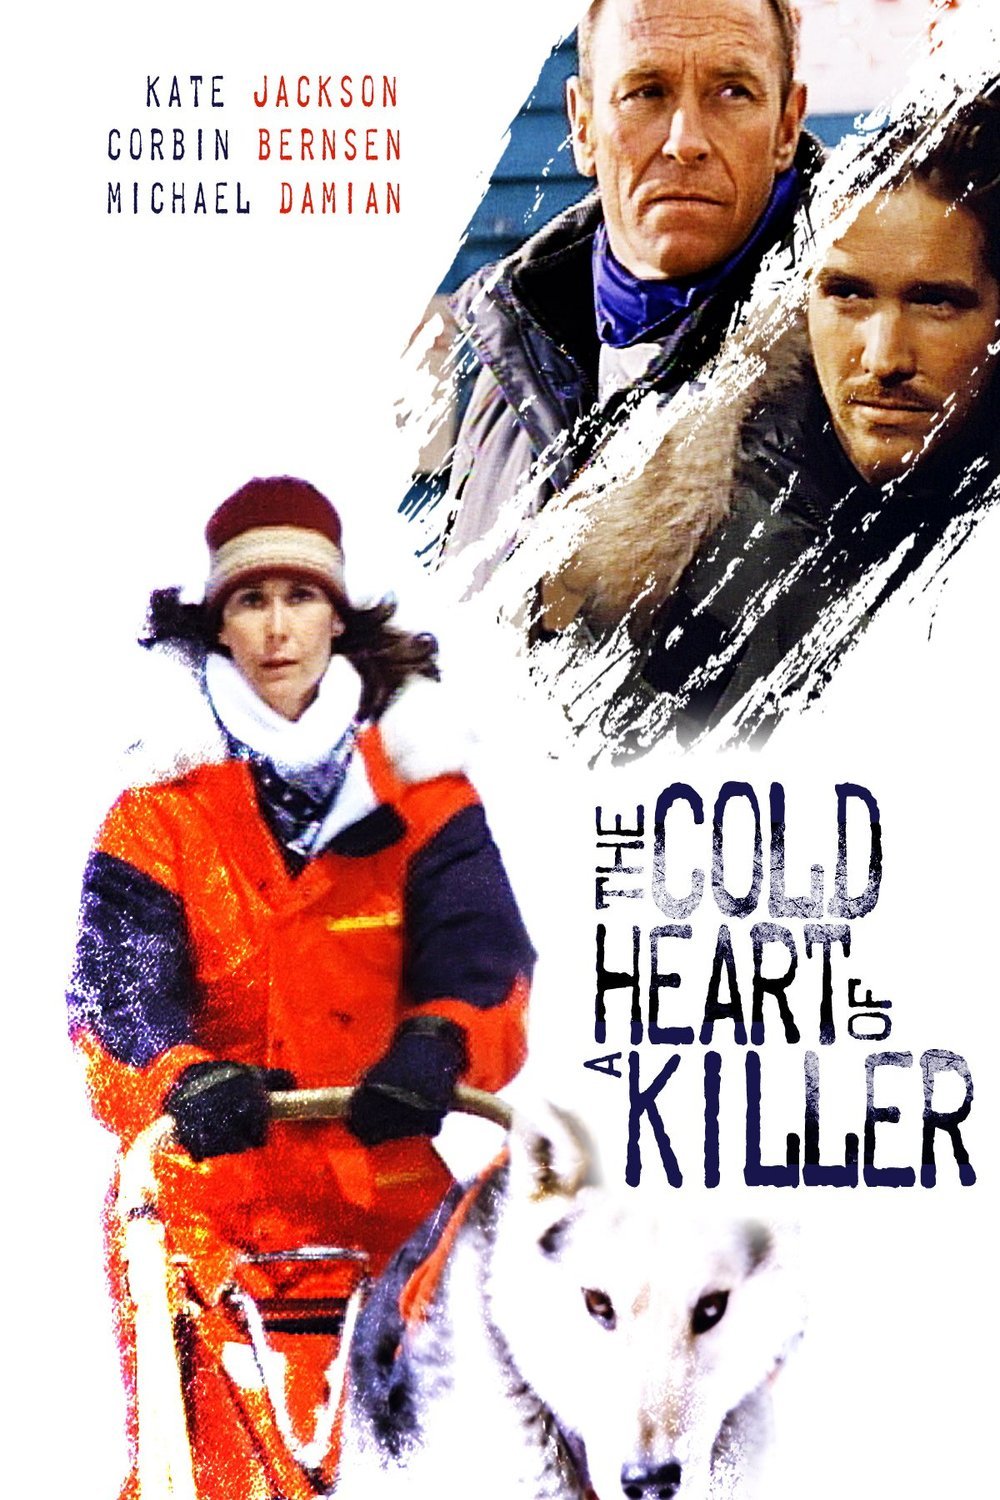 Poster of the movie The Cold Heart of a Killer